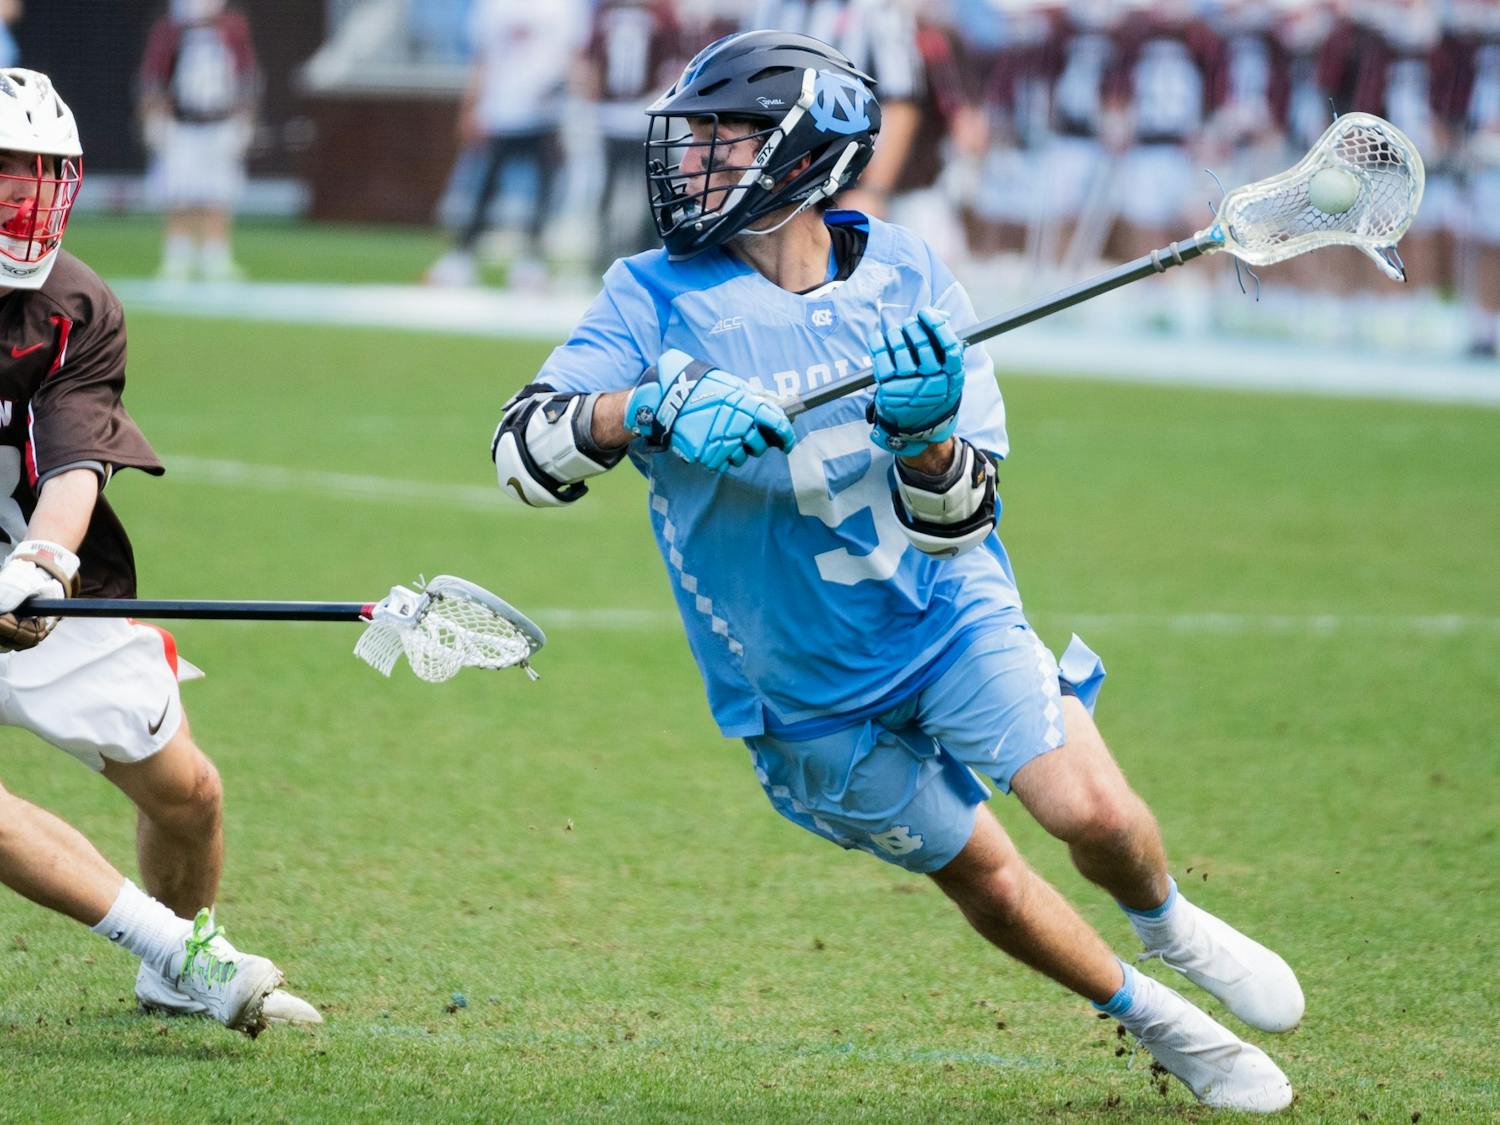 UNC senior attackman Jacob Kelly (9) looks to cross the ball during a men's lacrosse game at Dorrance Stadium on Wednesday, Feb. 23, 2022. UNC won 14-11.